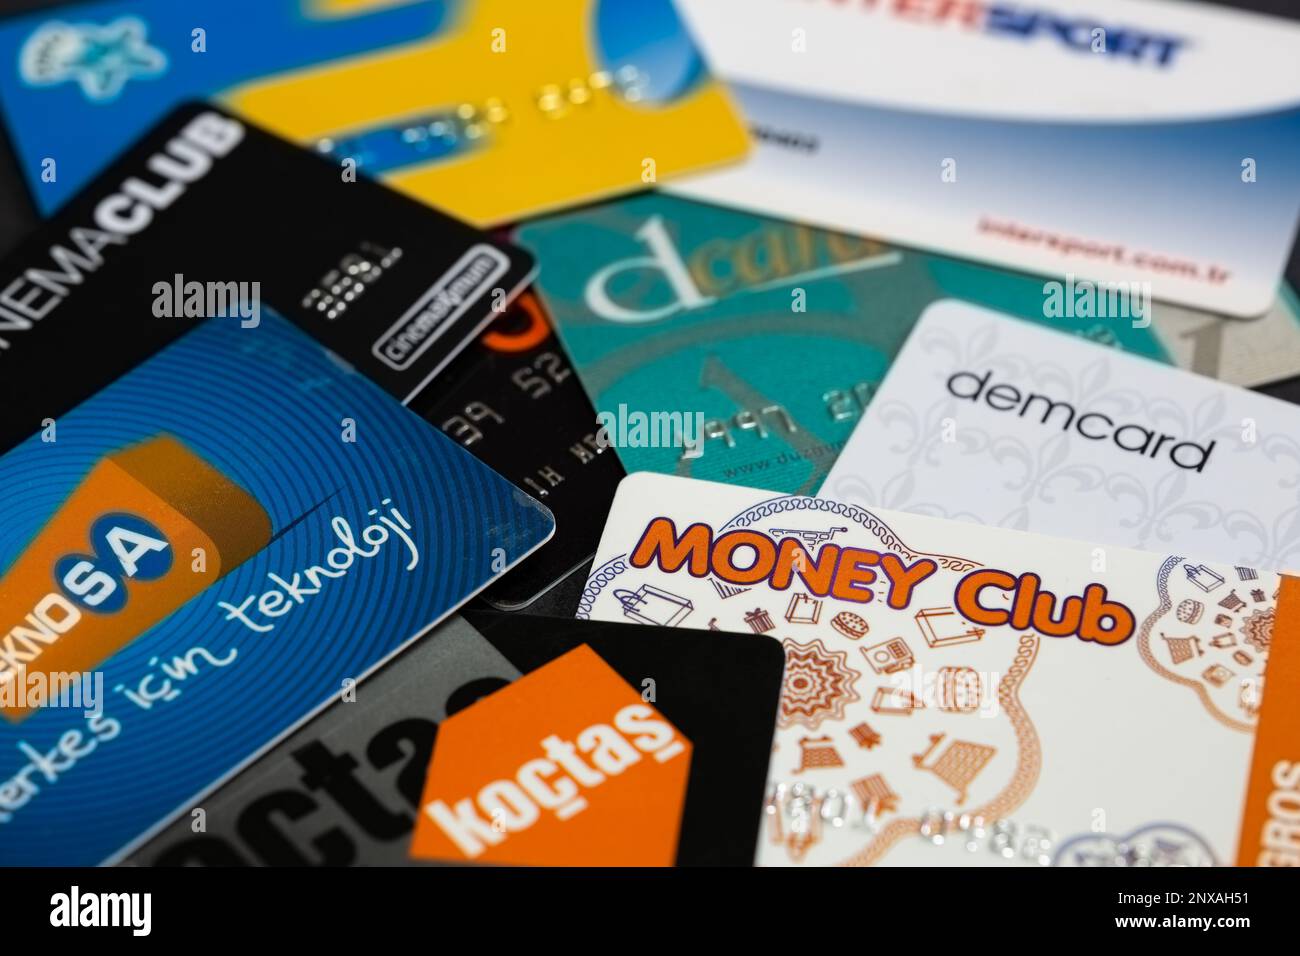 Selective focus on randomly arranged membership, gift and discount cards background of Turkish companies. Stock Photo